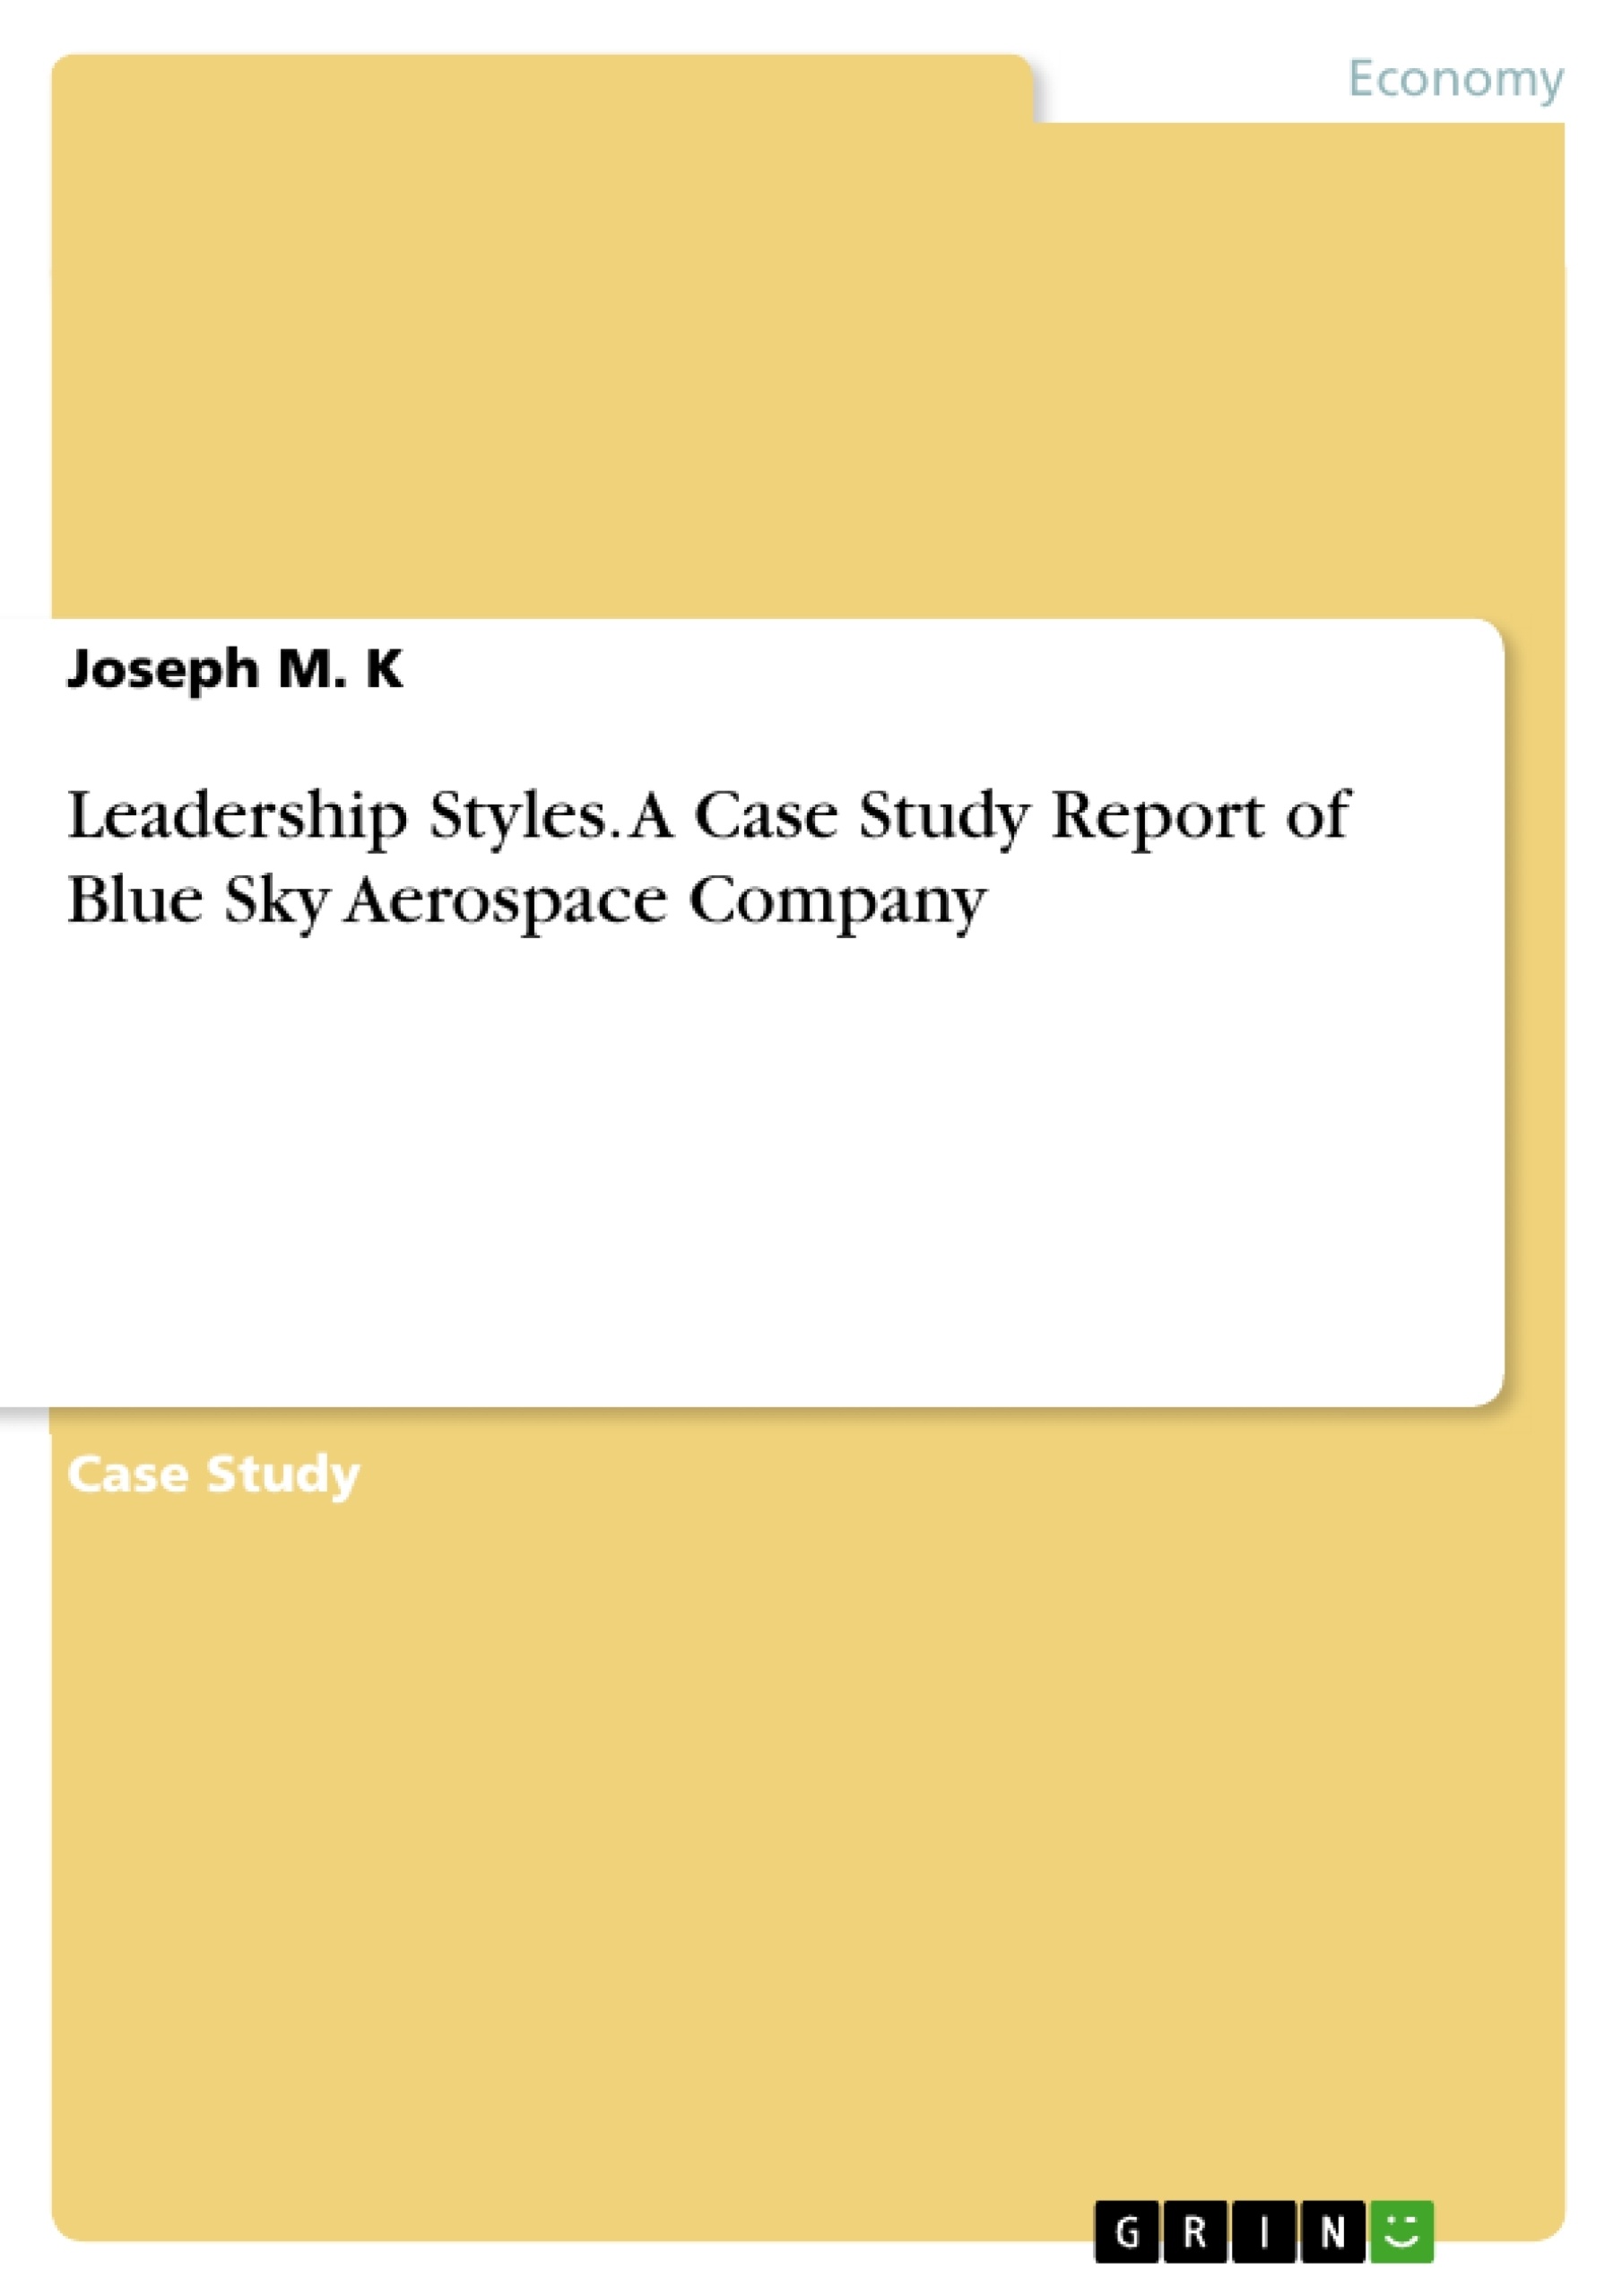 Title: Leadership Styles. A Case Study Report of Blue Sky Aerospace Company